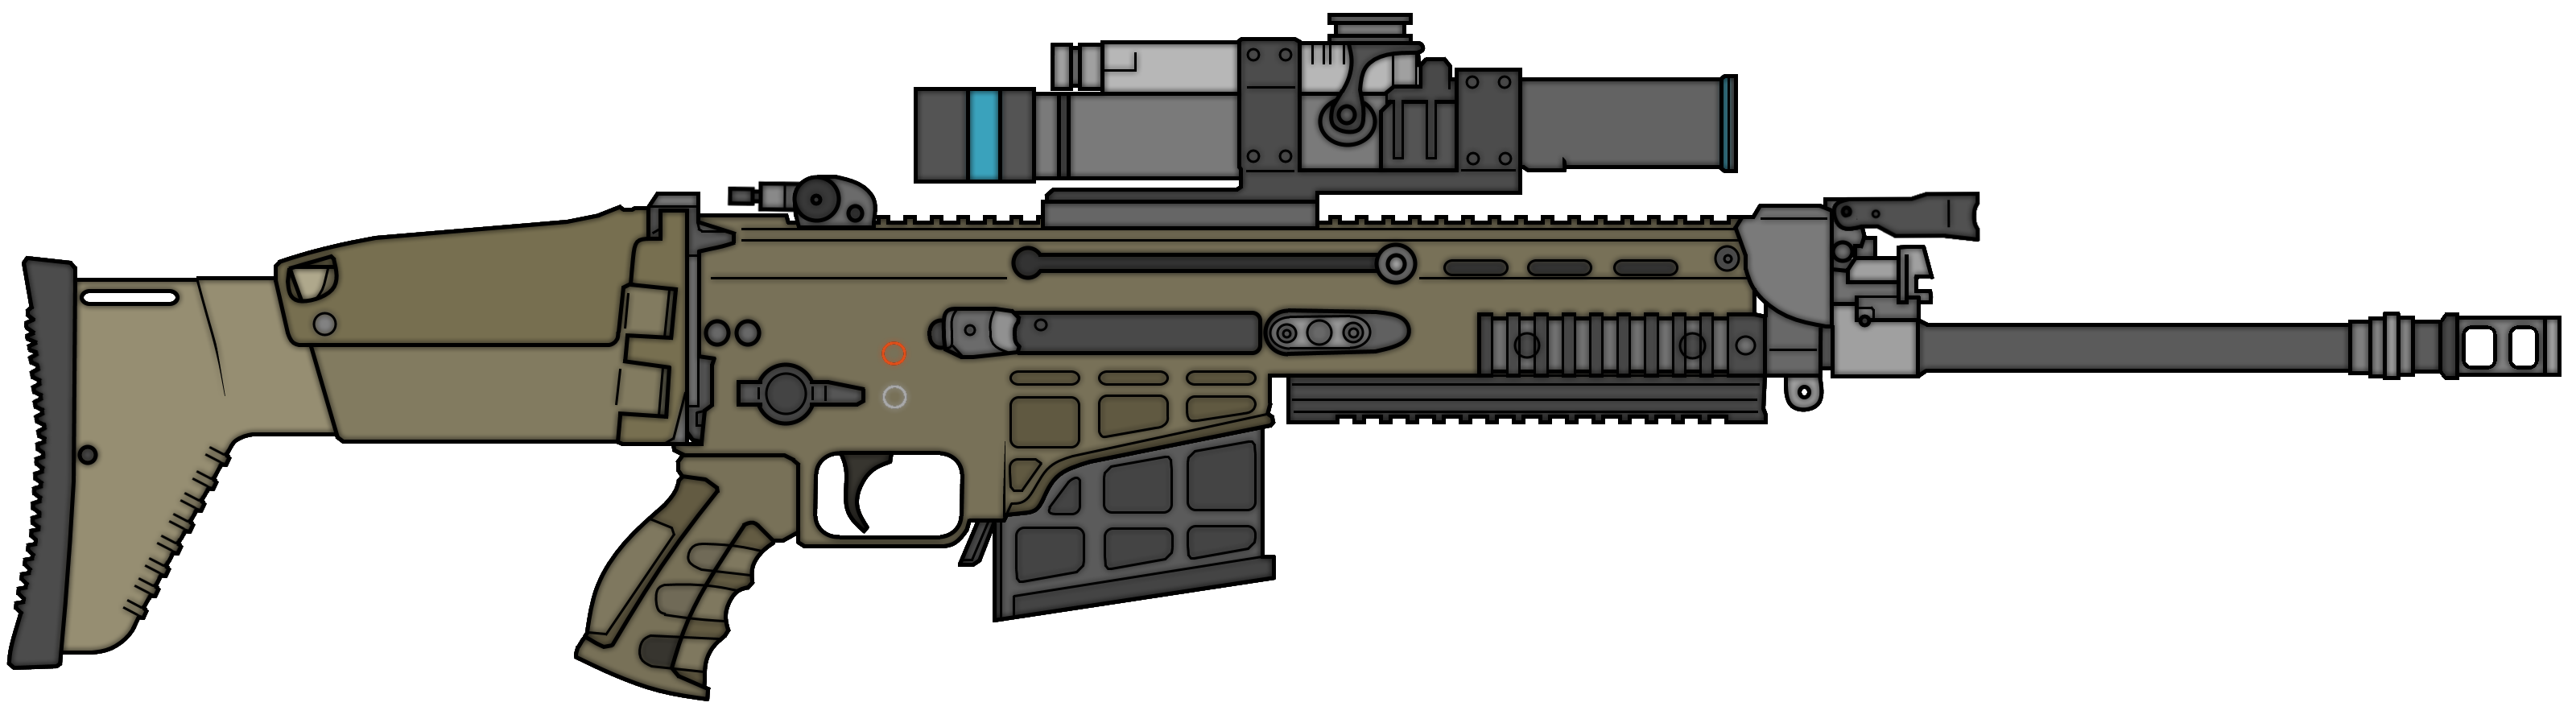 M98 SCSR-M1 Semi Automatic Sniper Rifle by TheFrozenWaffle on DeviantArt